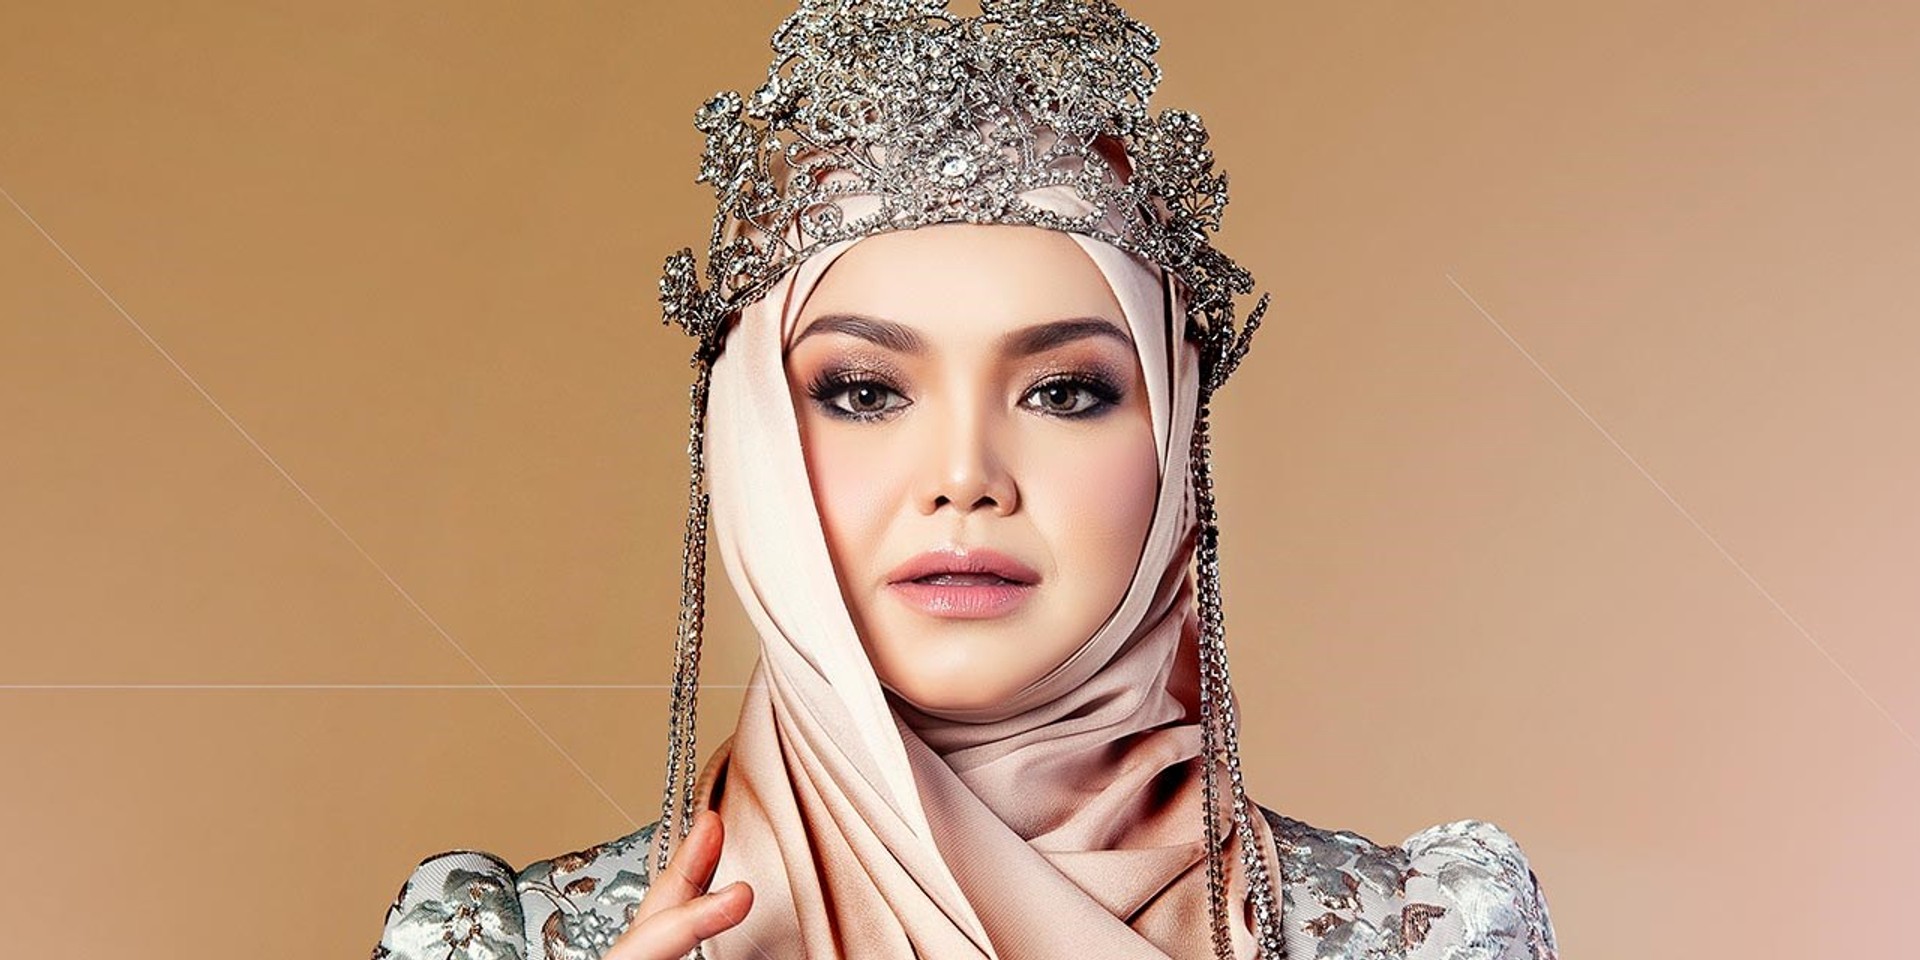 Siti Nurhaliza Siti Nurhaliza Age Height Weight Biography Net Worth In 2021 And More Dato